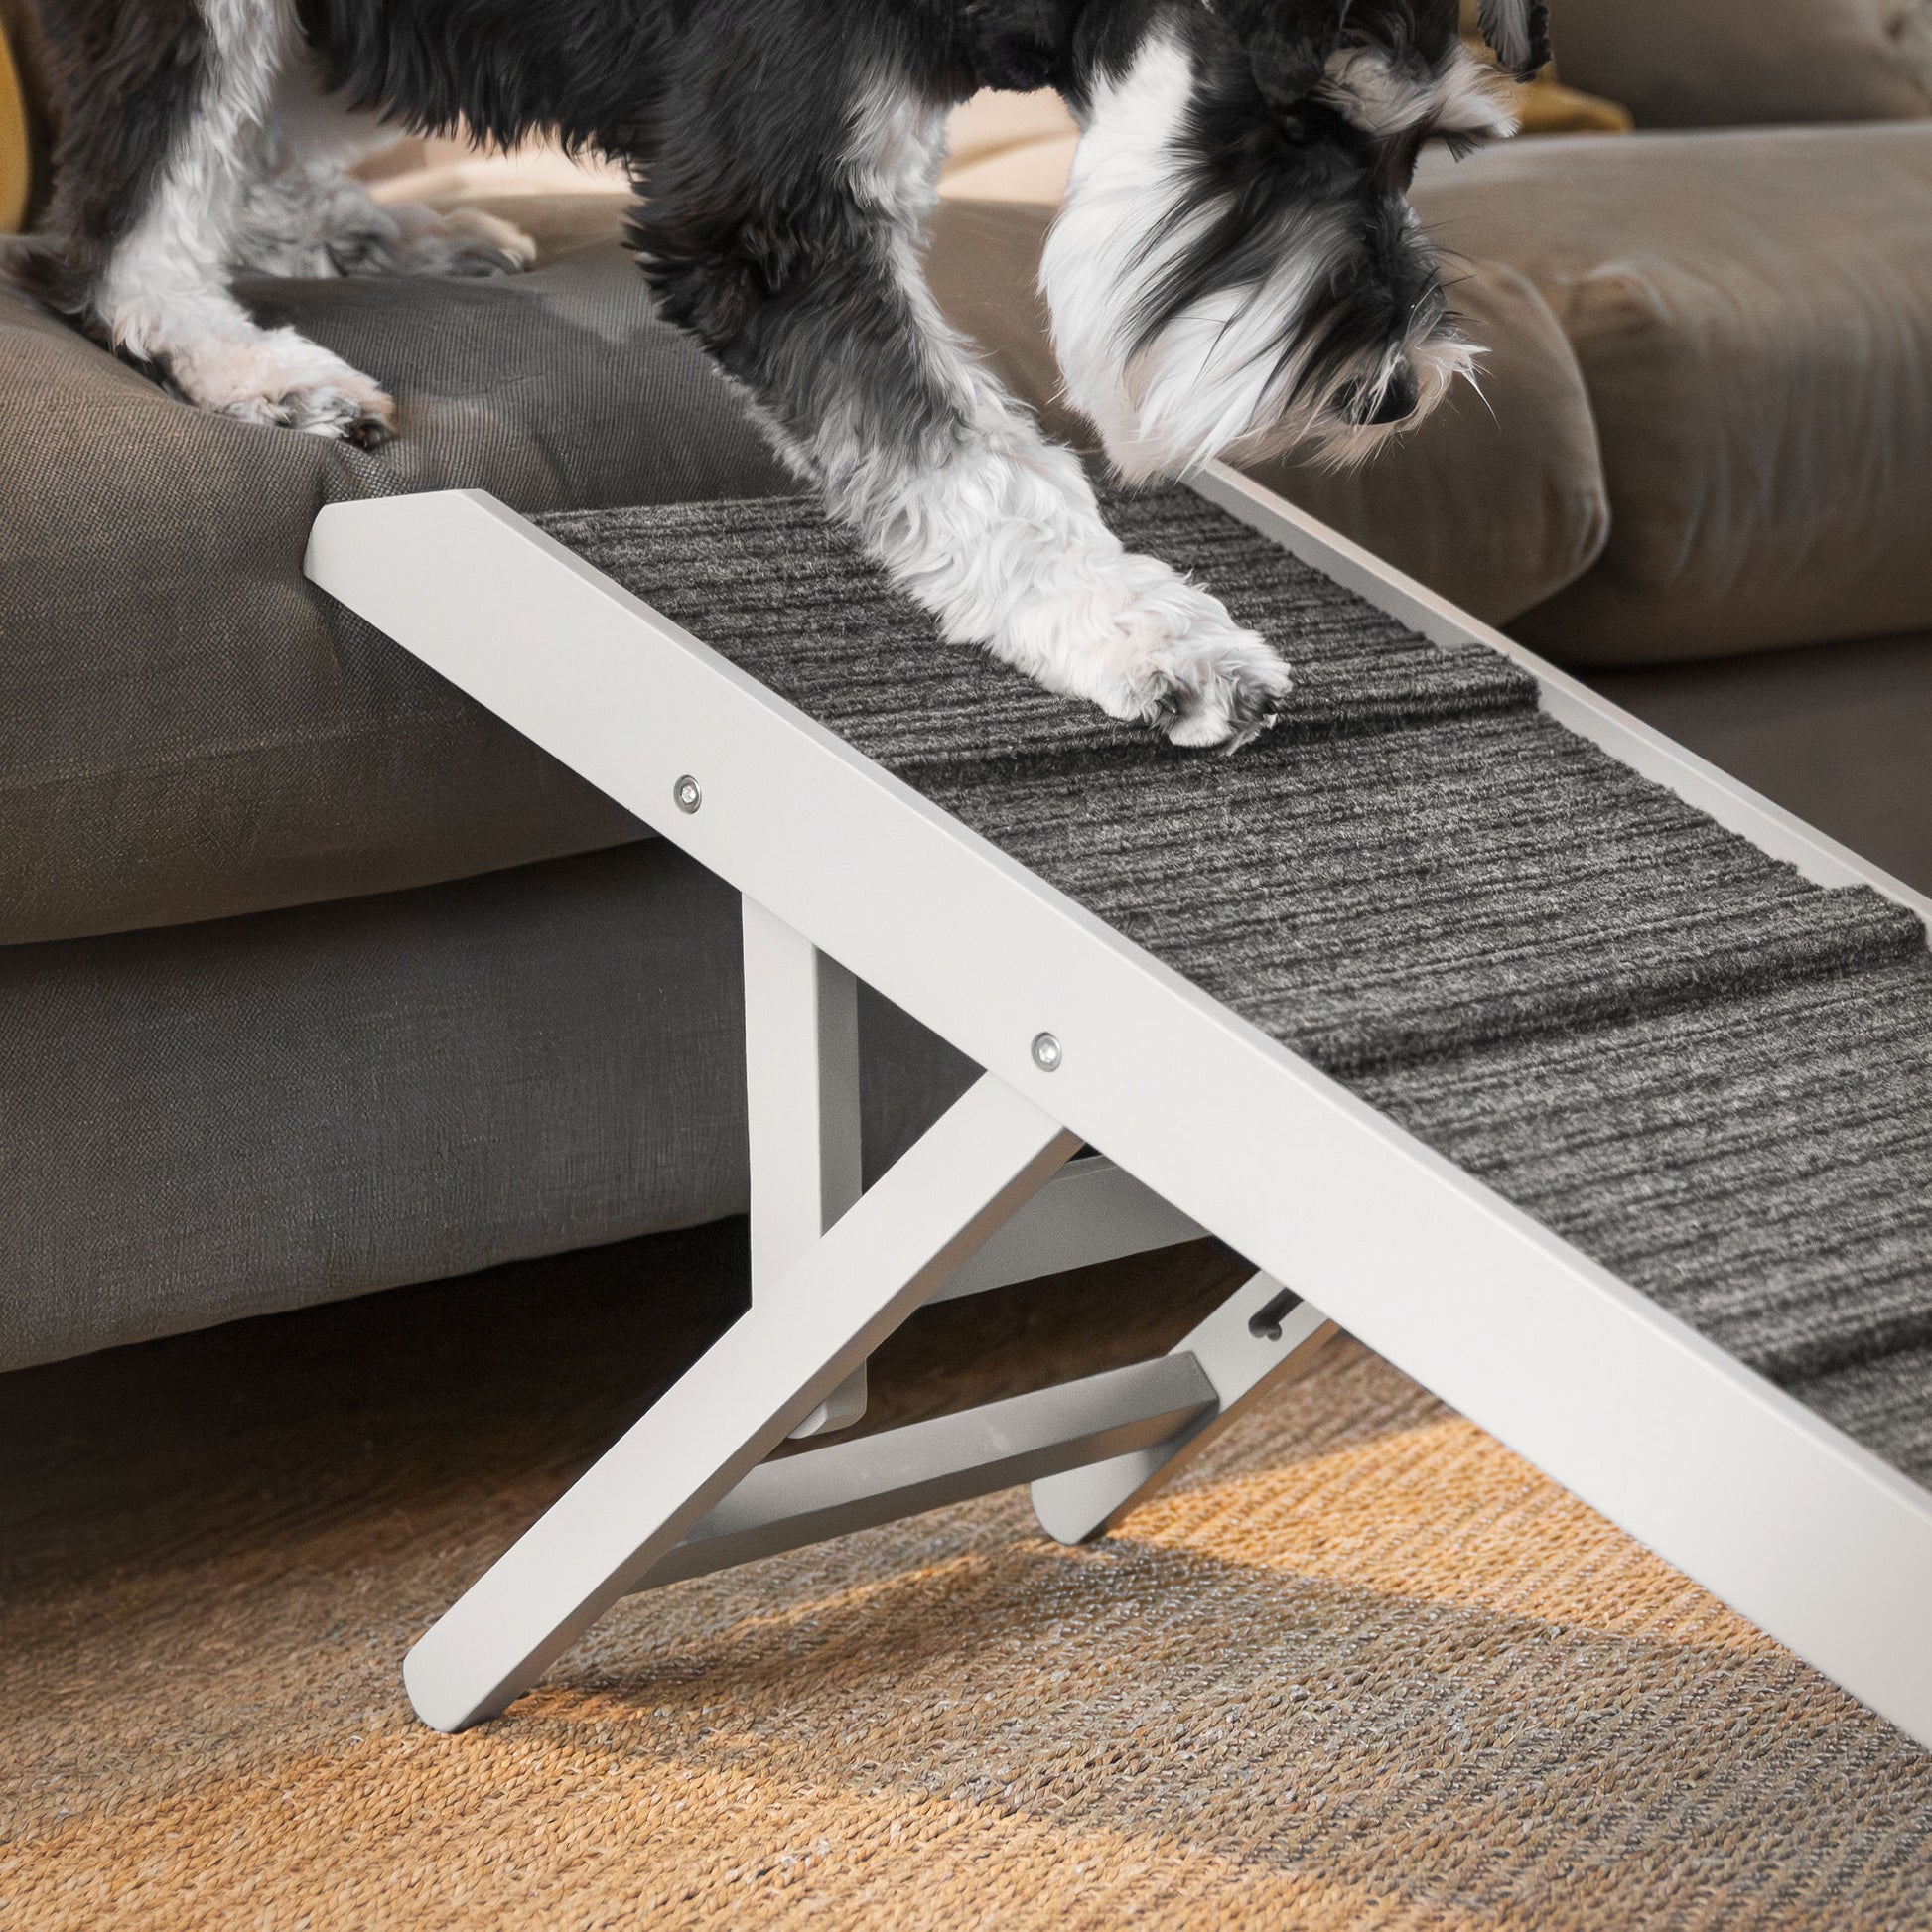 Discover the perfect pet furniture to help aid your furry friend, our super-strong dog ramp provides the ultimate comfort when climbing to join you on the couch! Featuring grooves for extra grip! Perfect for injured pets, puppy training and elderly dogs! Available now in 2 stylish colours at Lords & Labradors     